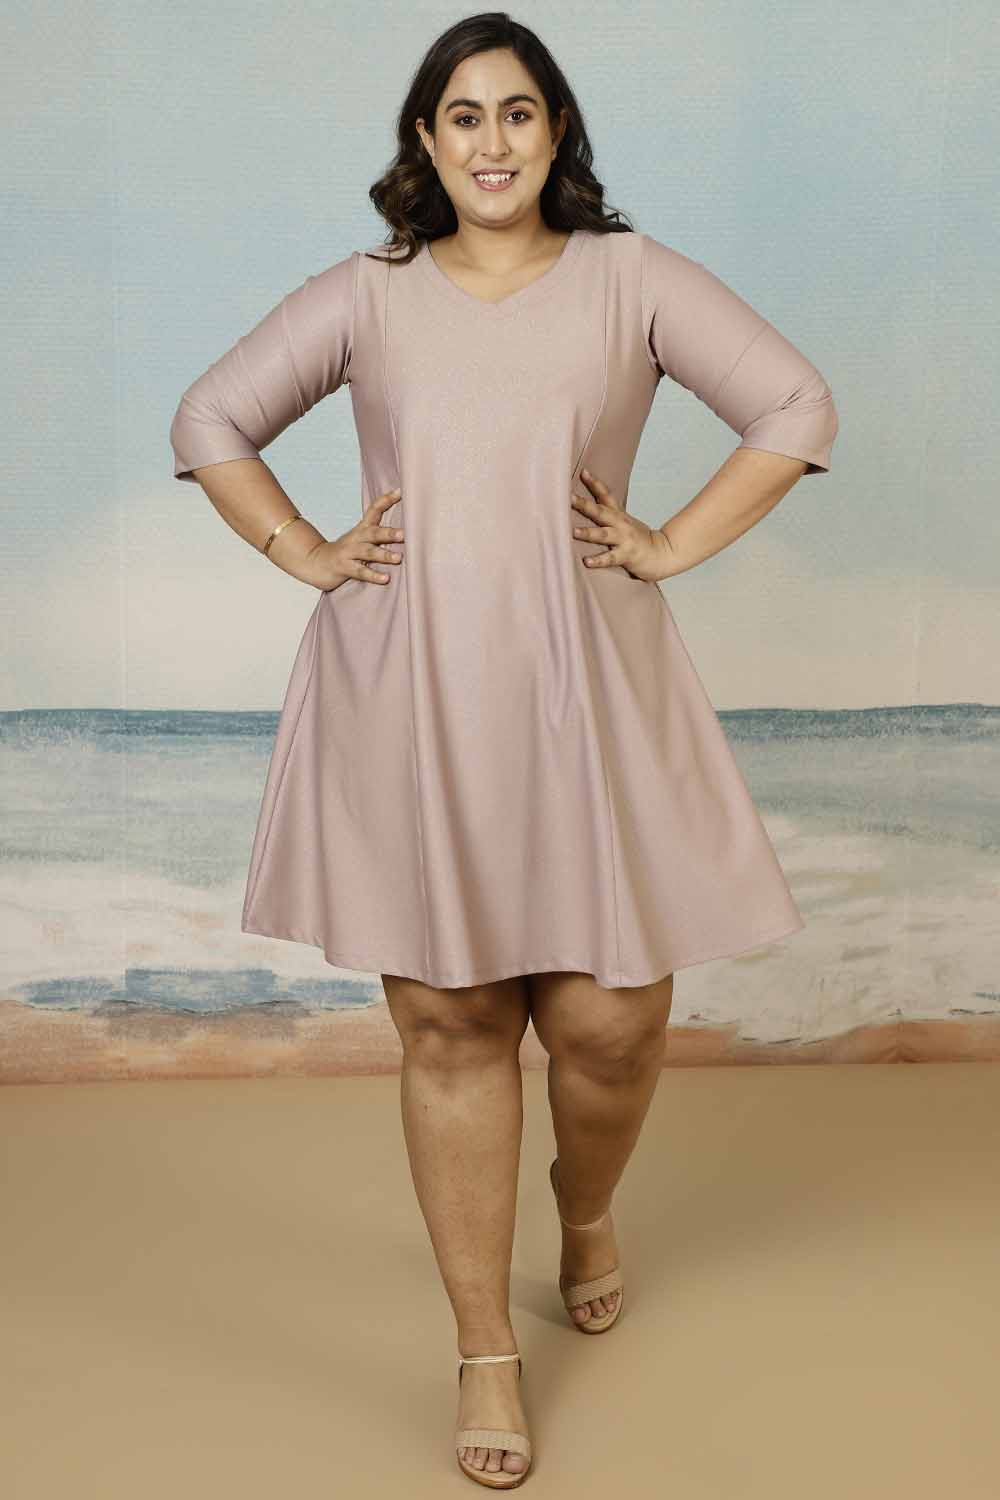 Buy Comfortable Dresses For Chubby Girls Online